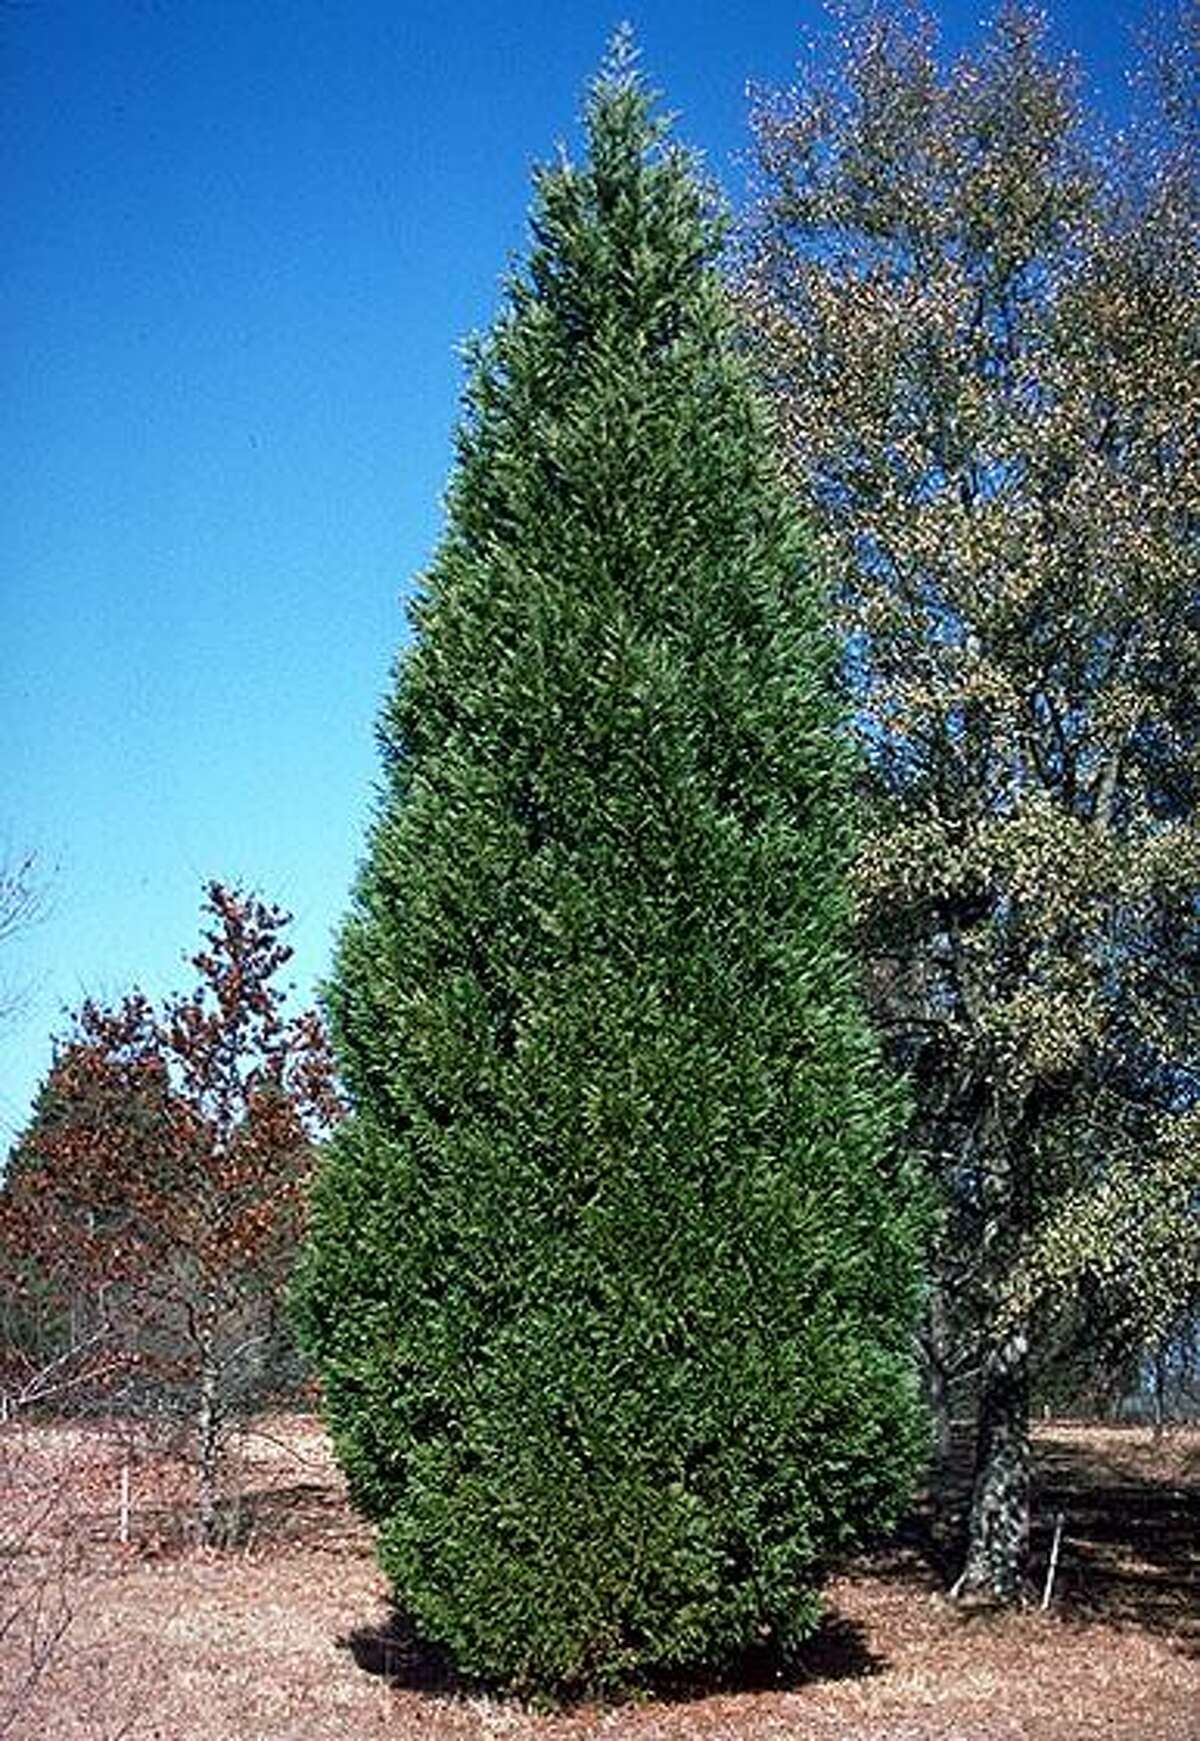 Arizona cypress can grow to 40 feet tall after being planted in the landscape.